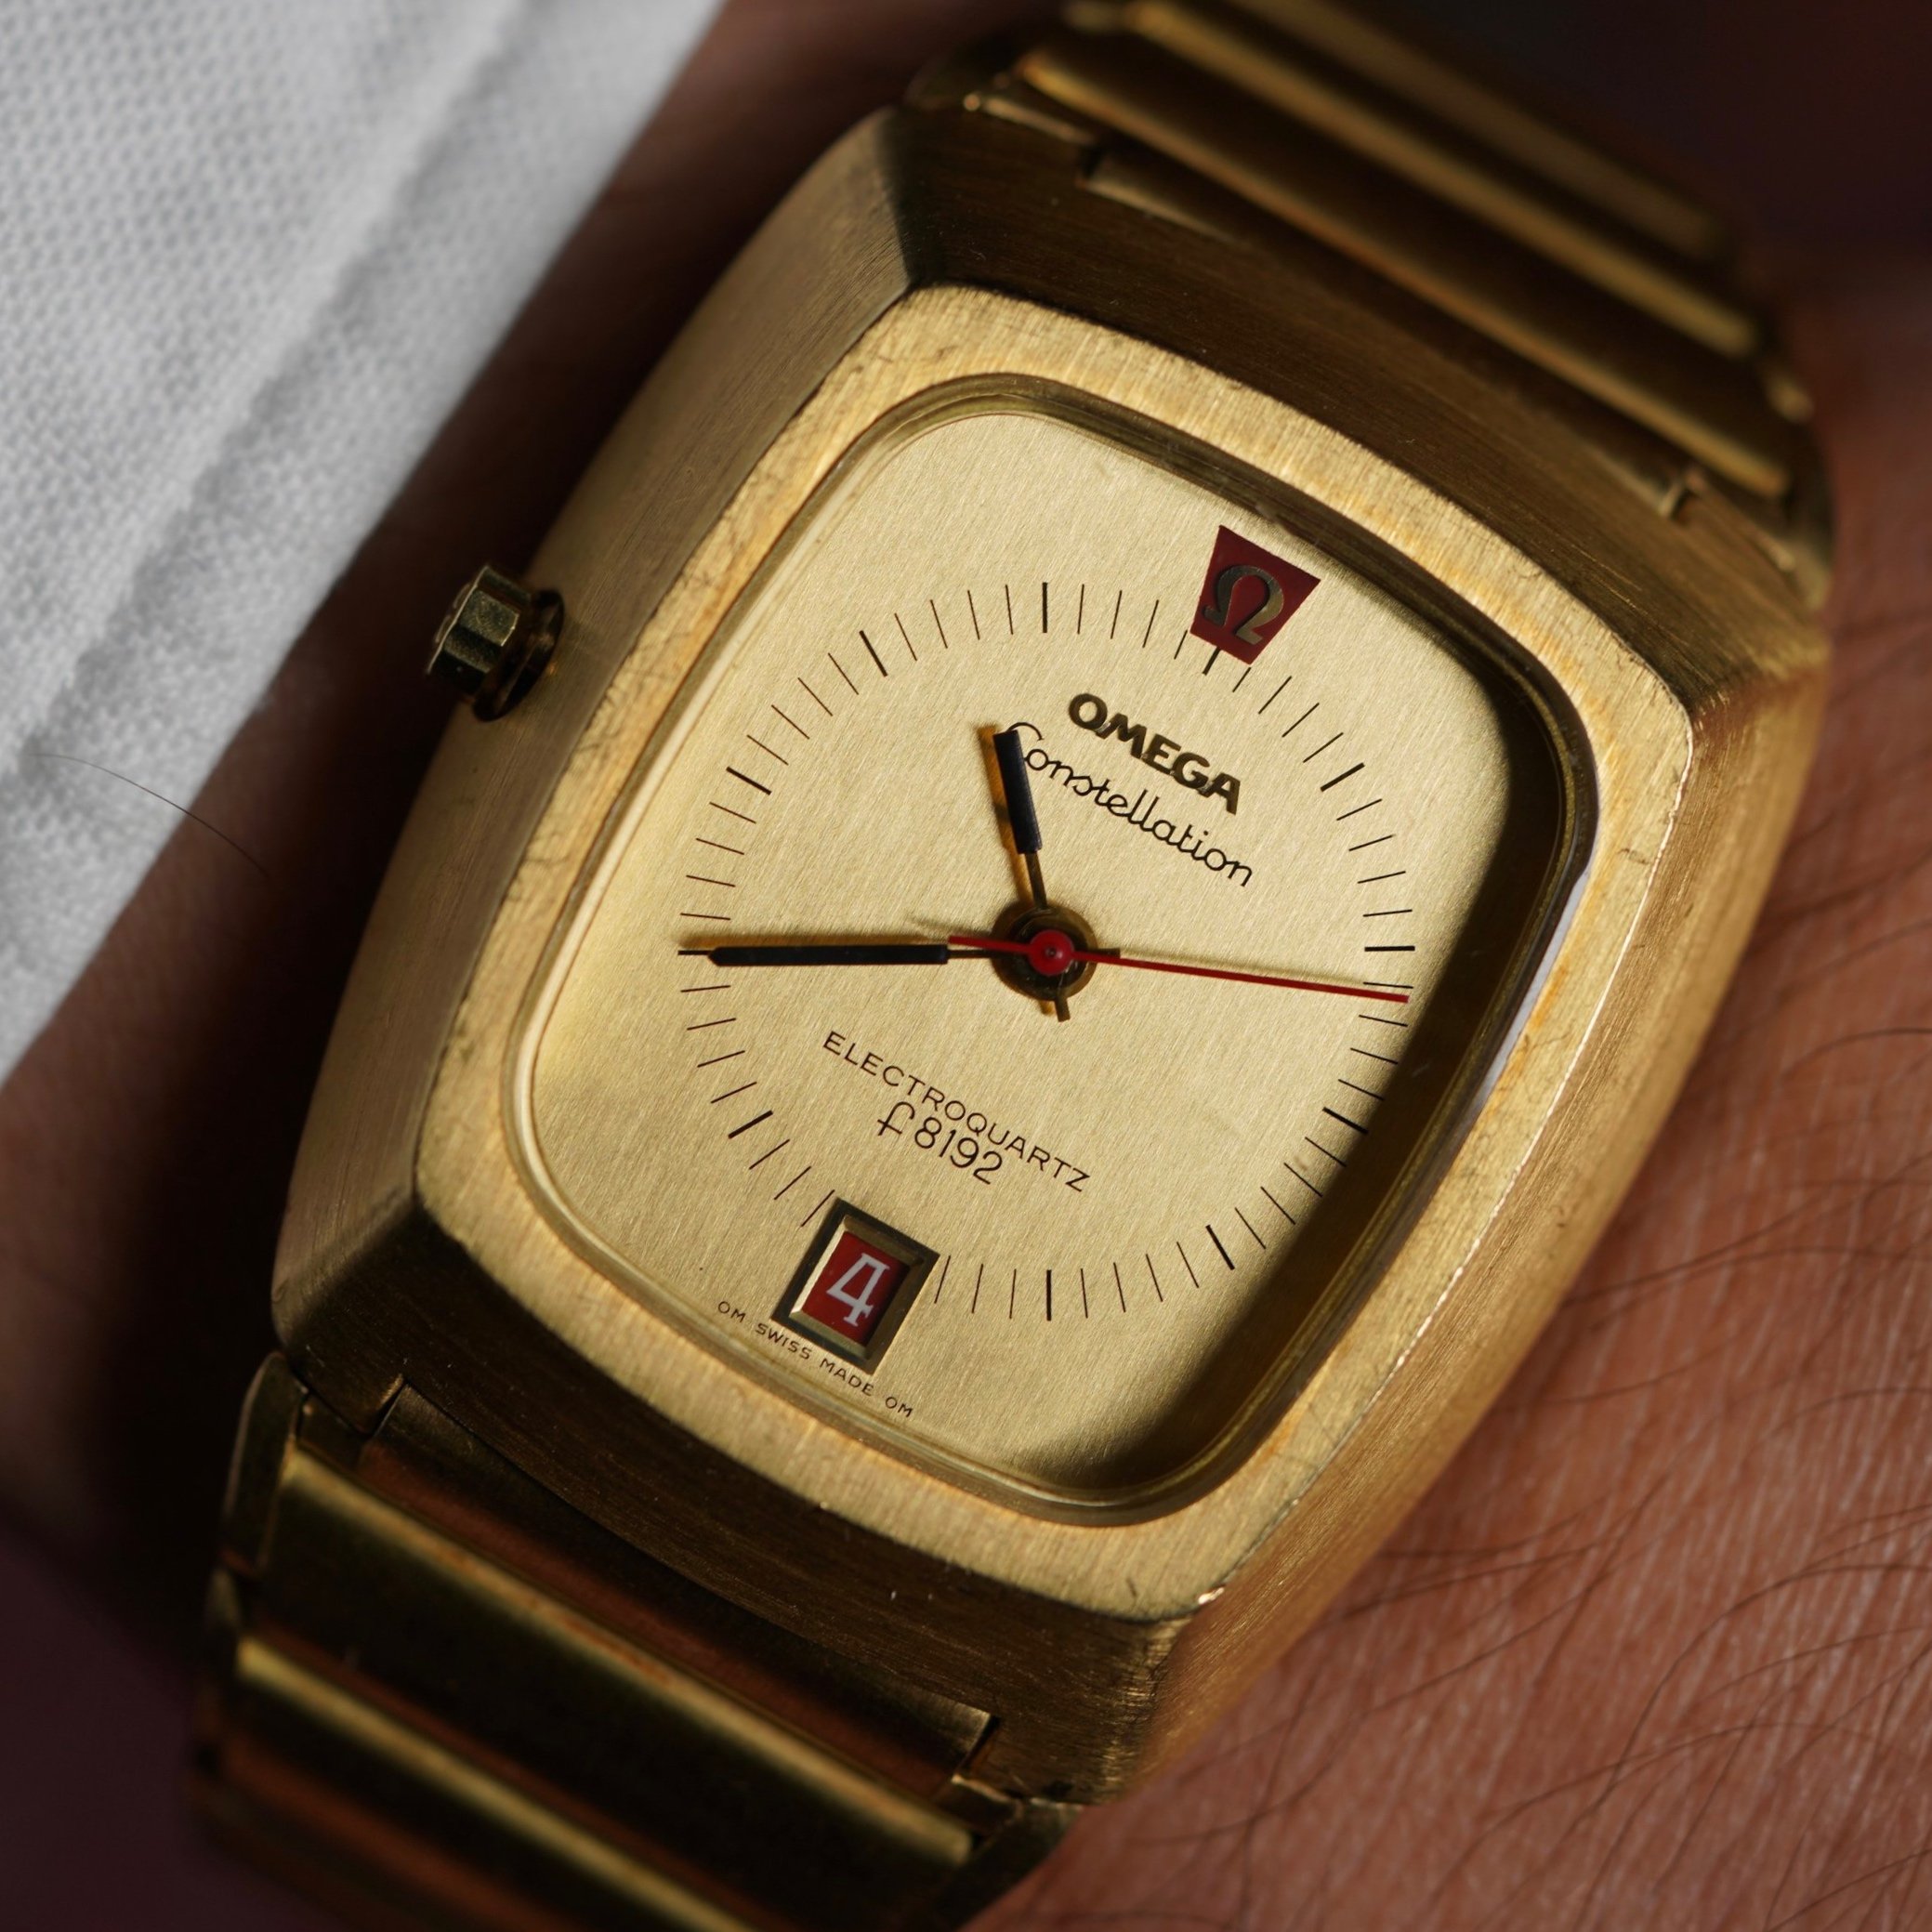 OMEGA Constellation Reference 196.005 †300Hz in 18K Yellow Gold Unpolished